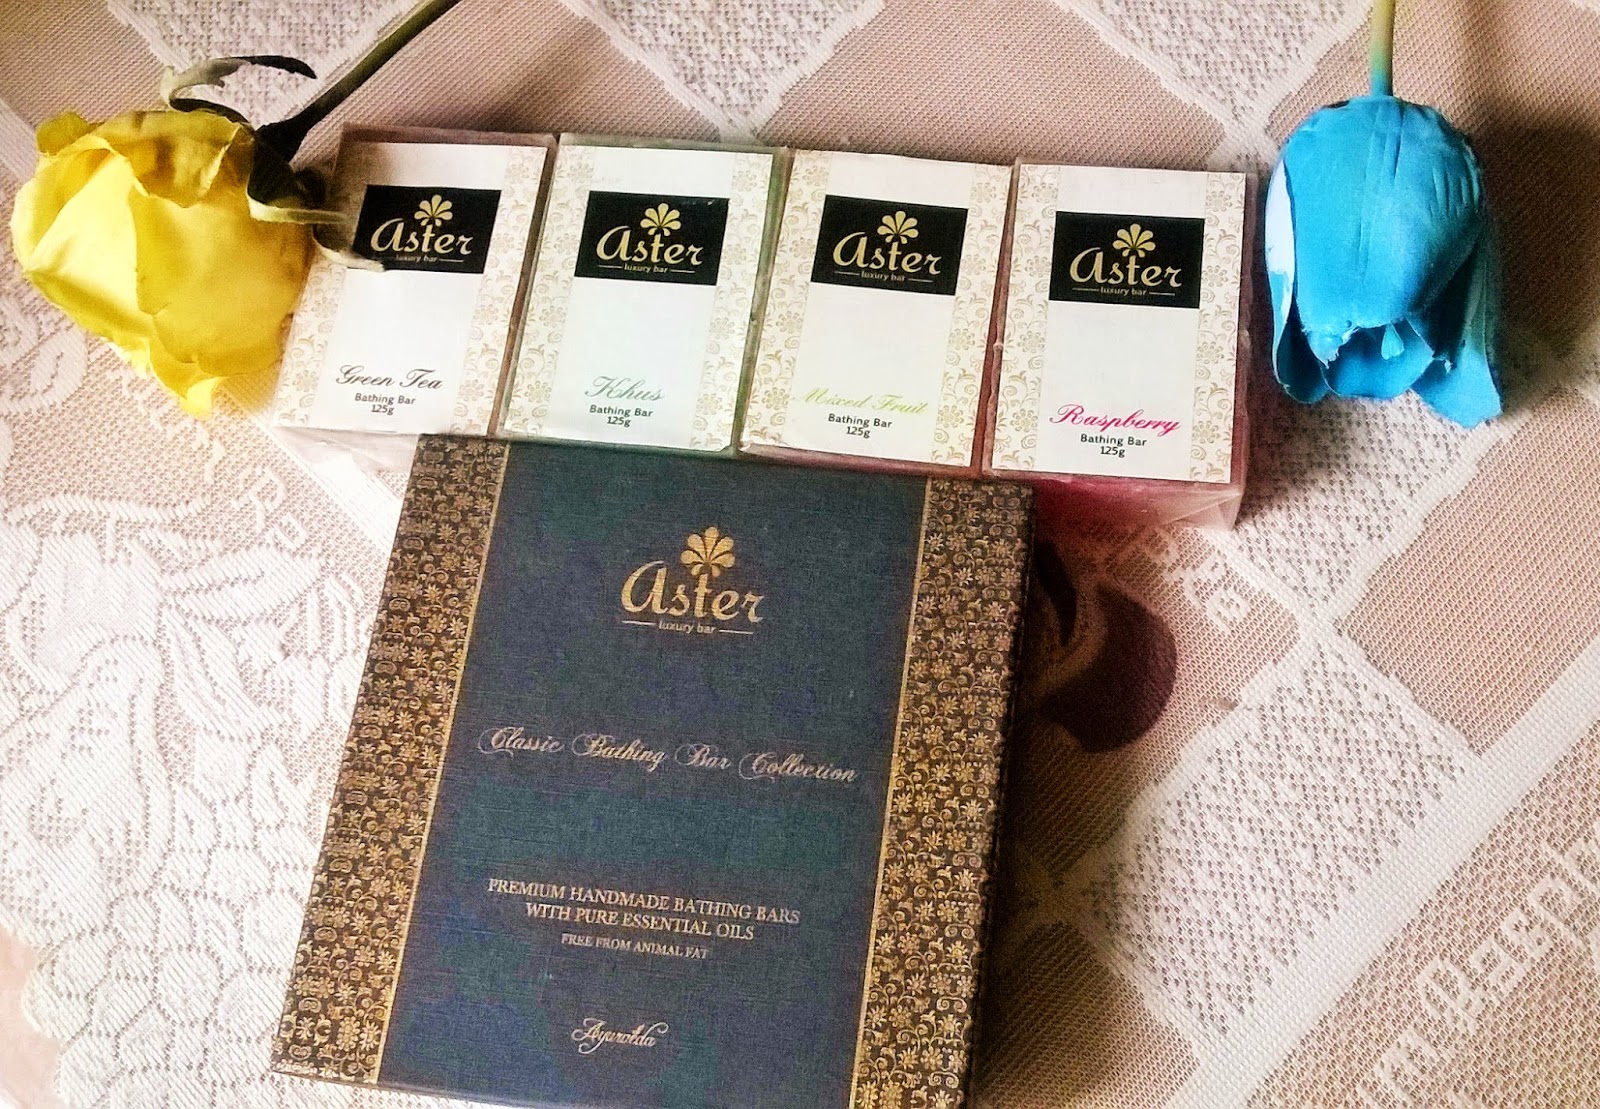 Beauty & Beyond: The Aster Blaster before Diwali from Aster Luxury Soaps